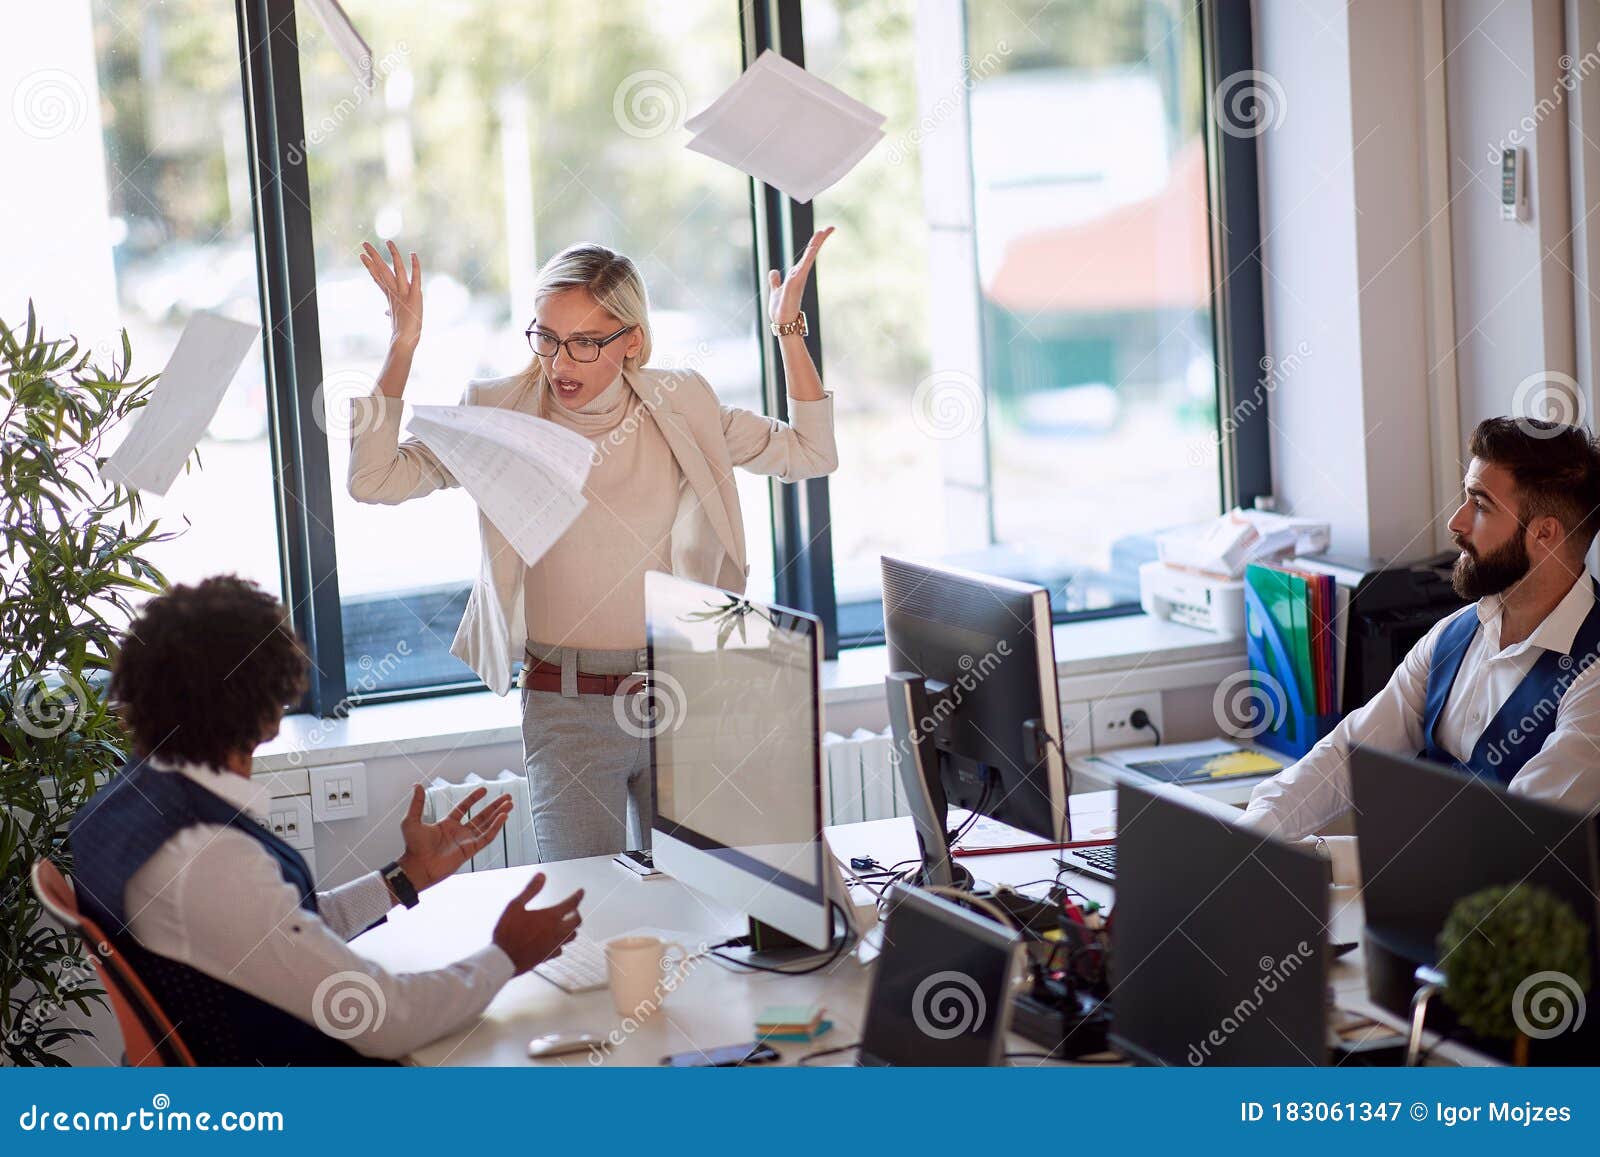 businesswoman getting angry at a coworker. businesswoman throwing the papers in rage